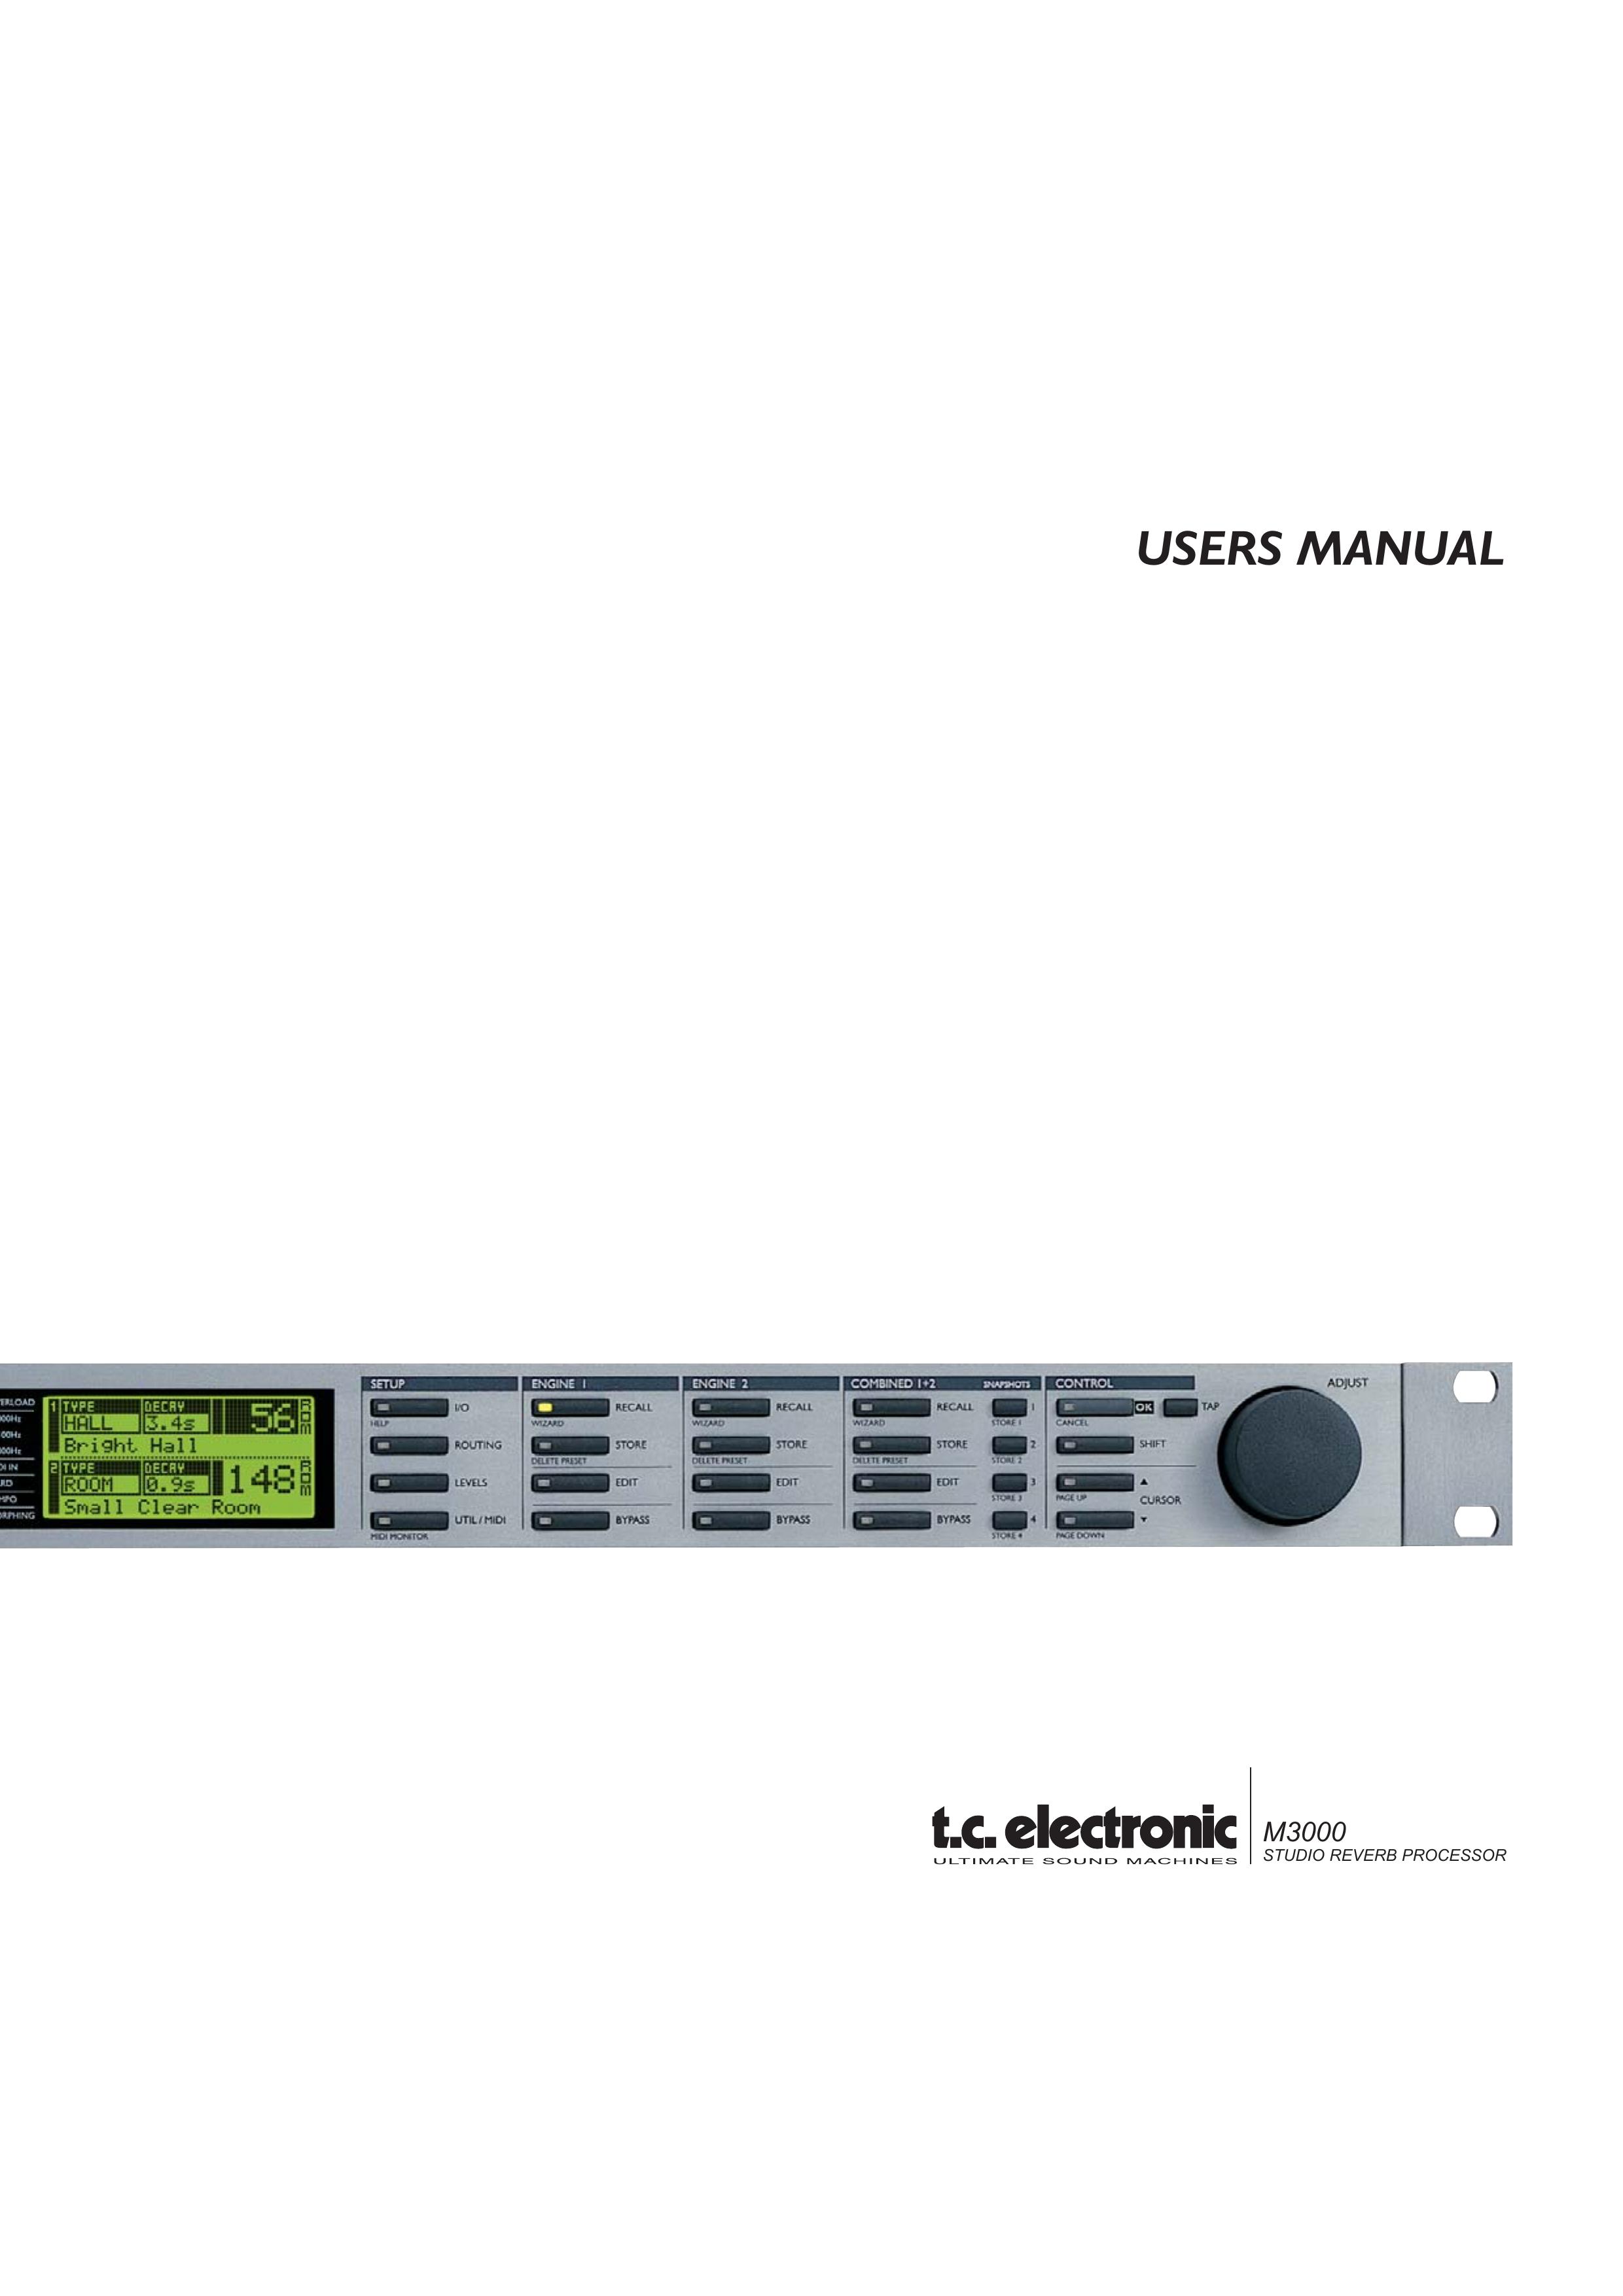 TC electronic SDN BHD M3000 Musical Instrument User Manual